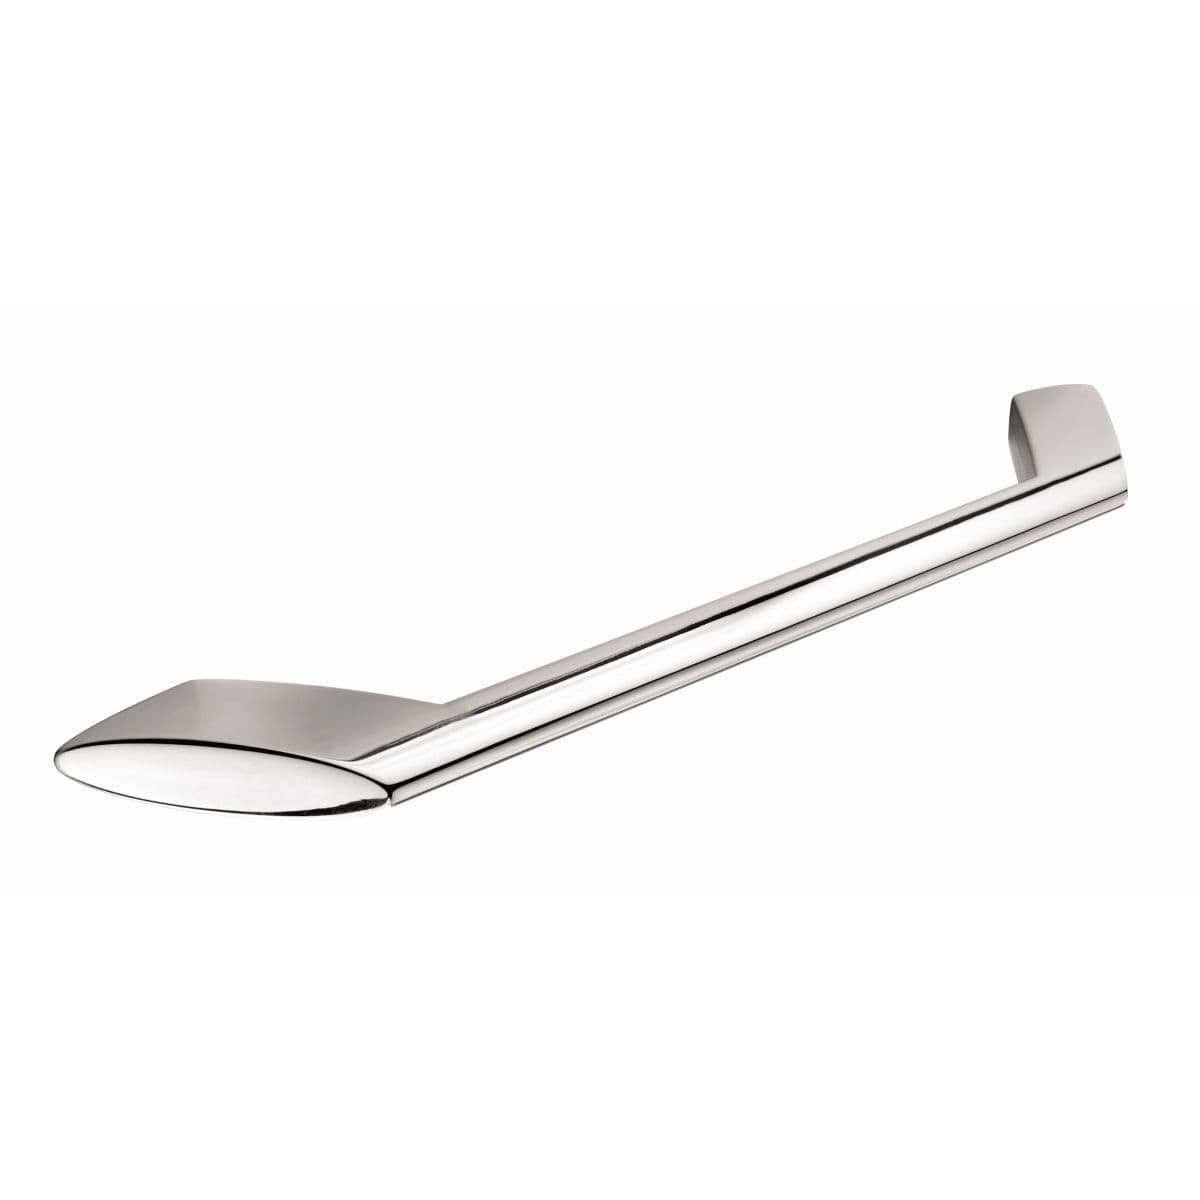 HAXBY D Cupboard Handle - 160mm h/c size - 3 finishes (PWS H1114.160)